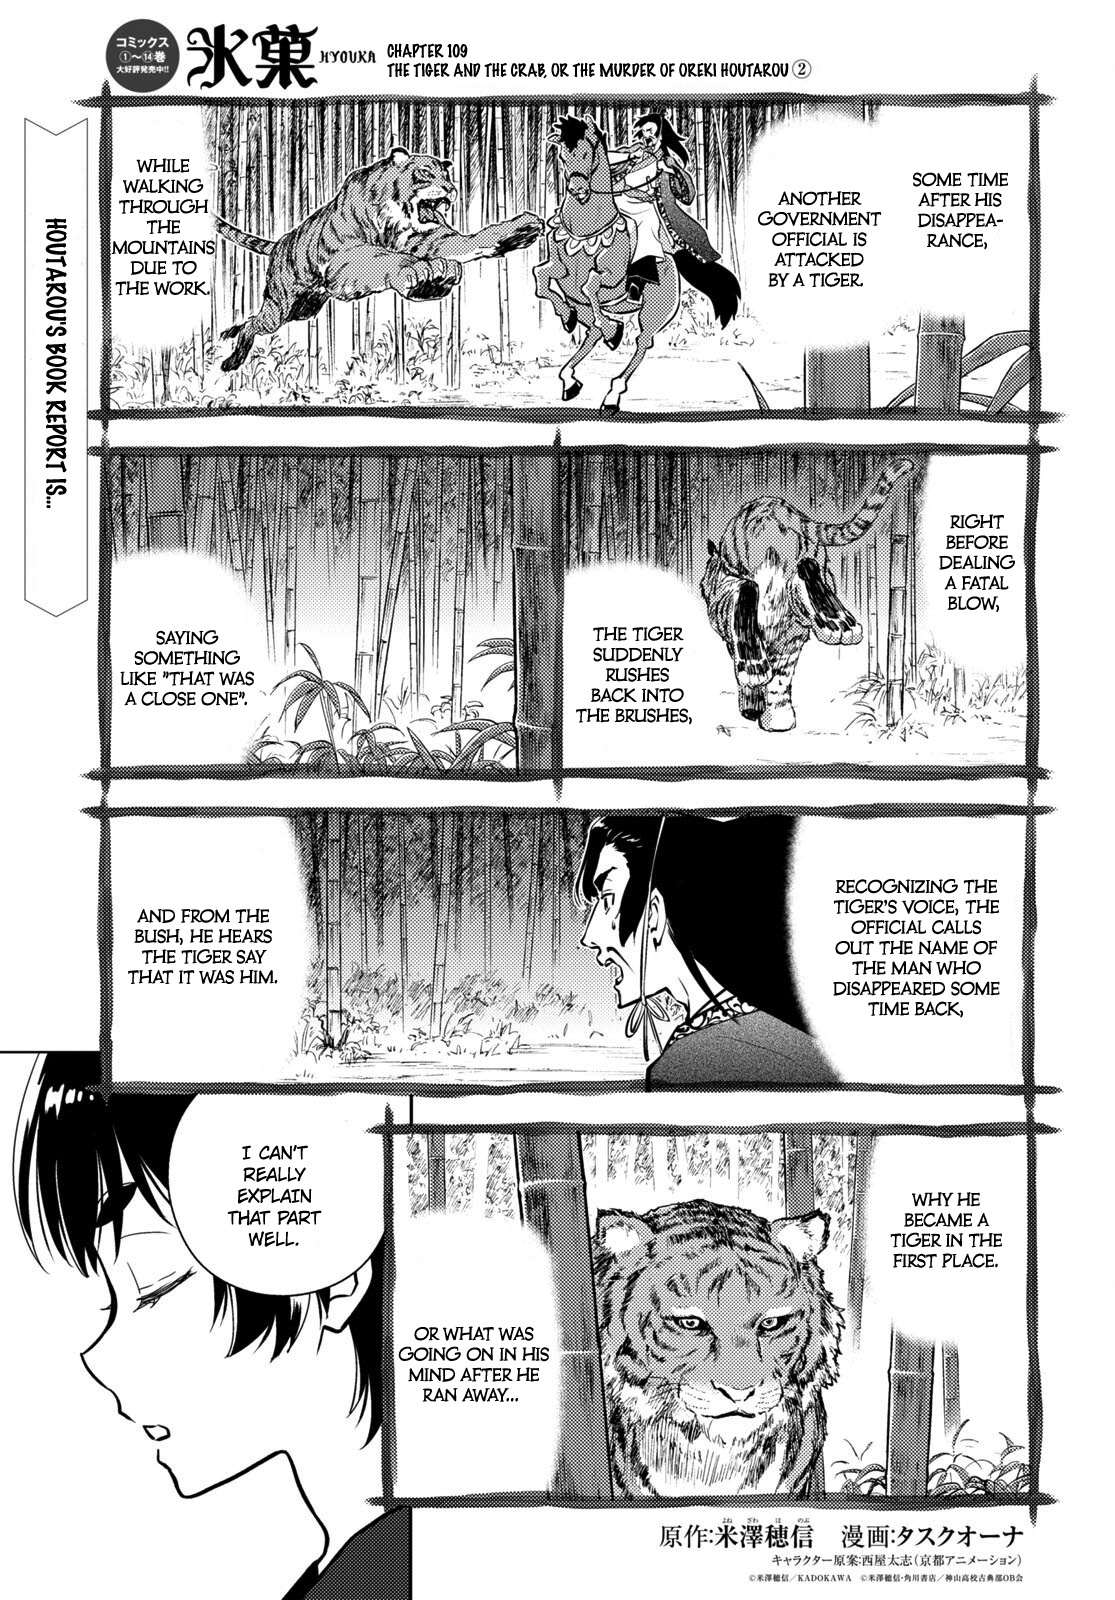 Hyouka Chapter 109: The Tiger And The Crab, Or The Murder Of Oreki Houtarou ➁ - Picture 1